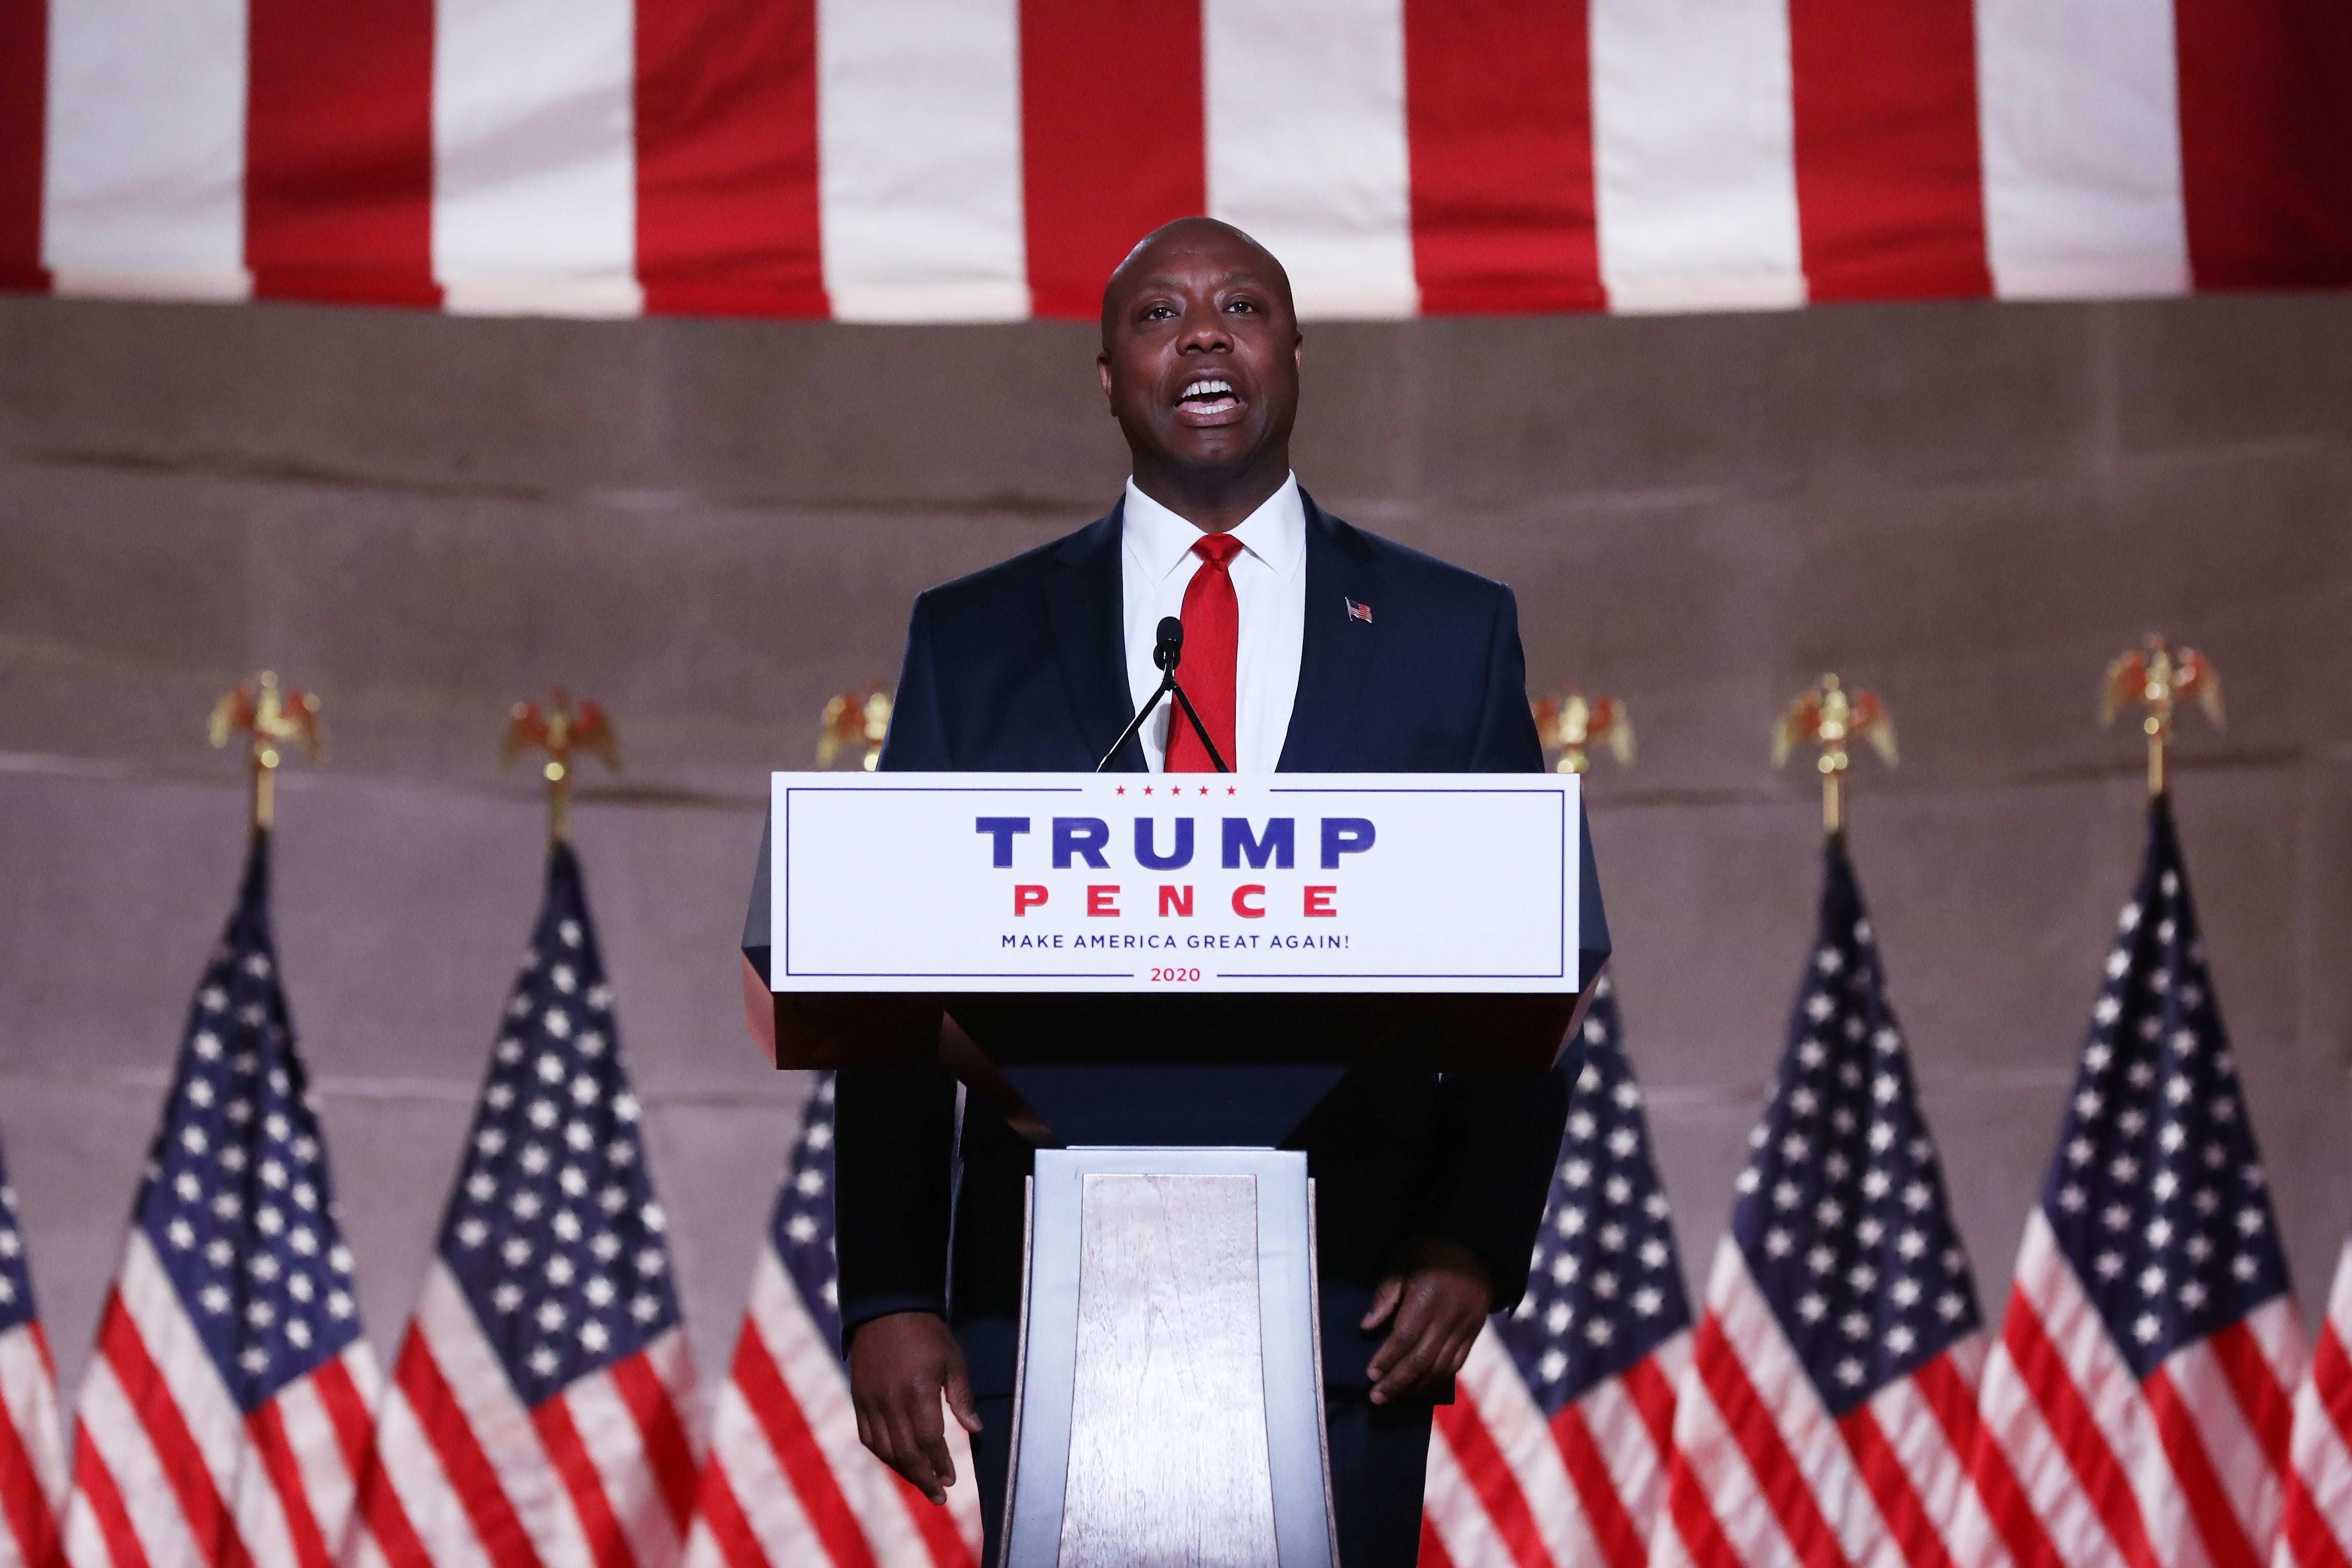 Tim Scott speaks at a podium with a "Trump Pence" sign on it. Behind him are American flags.